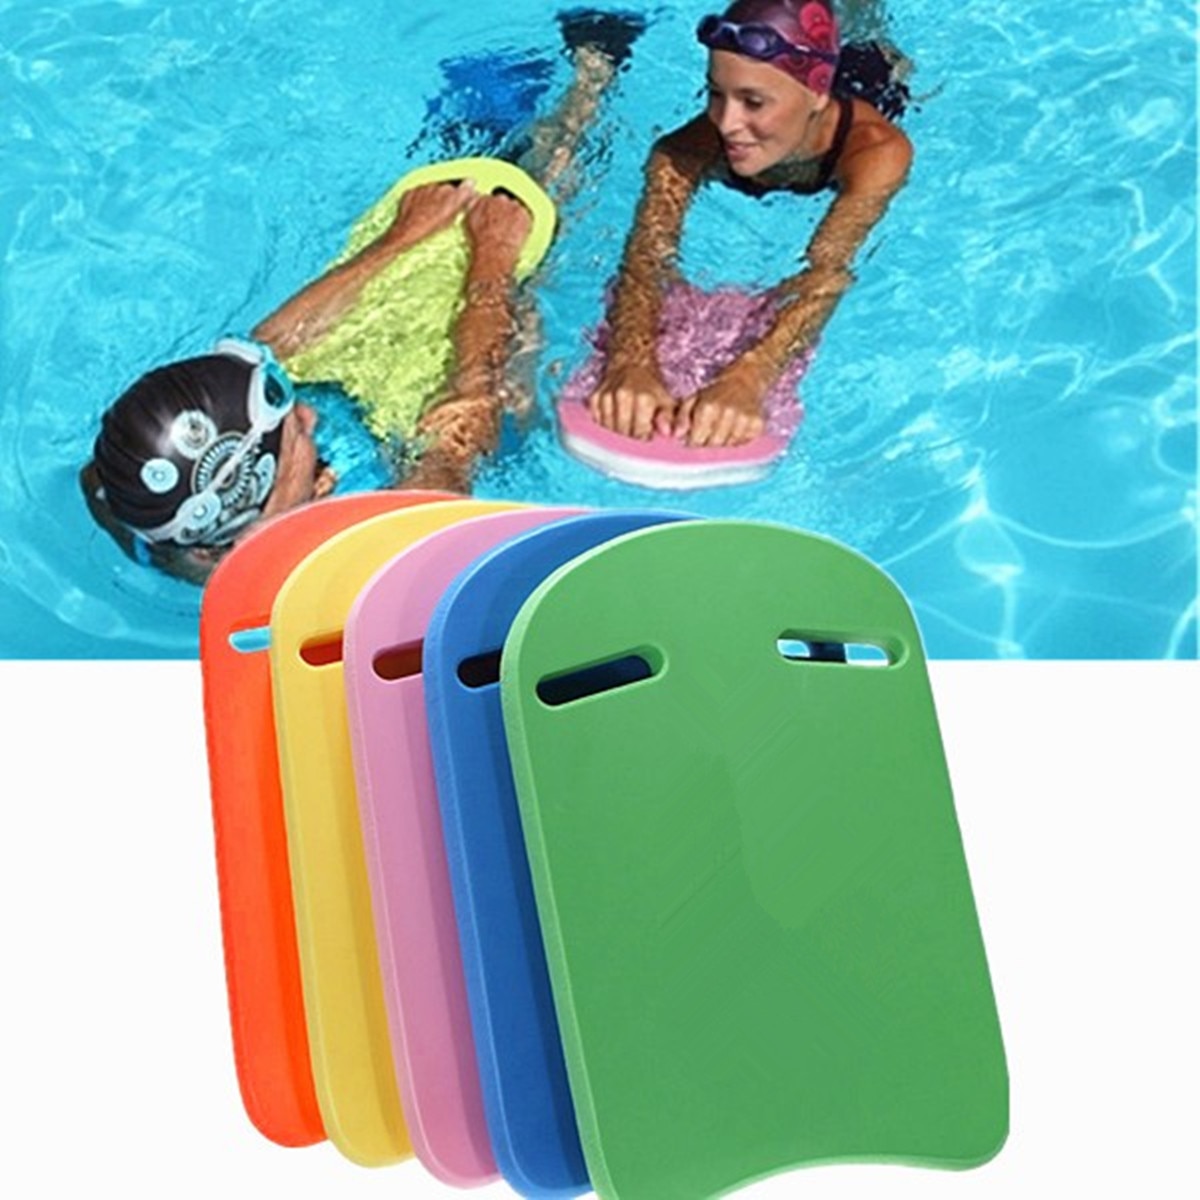 Swimming Kickboard Swimming Training Aid Pool Exercise Equipment for Kids and Adults